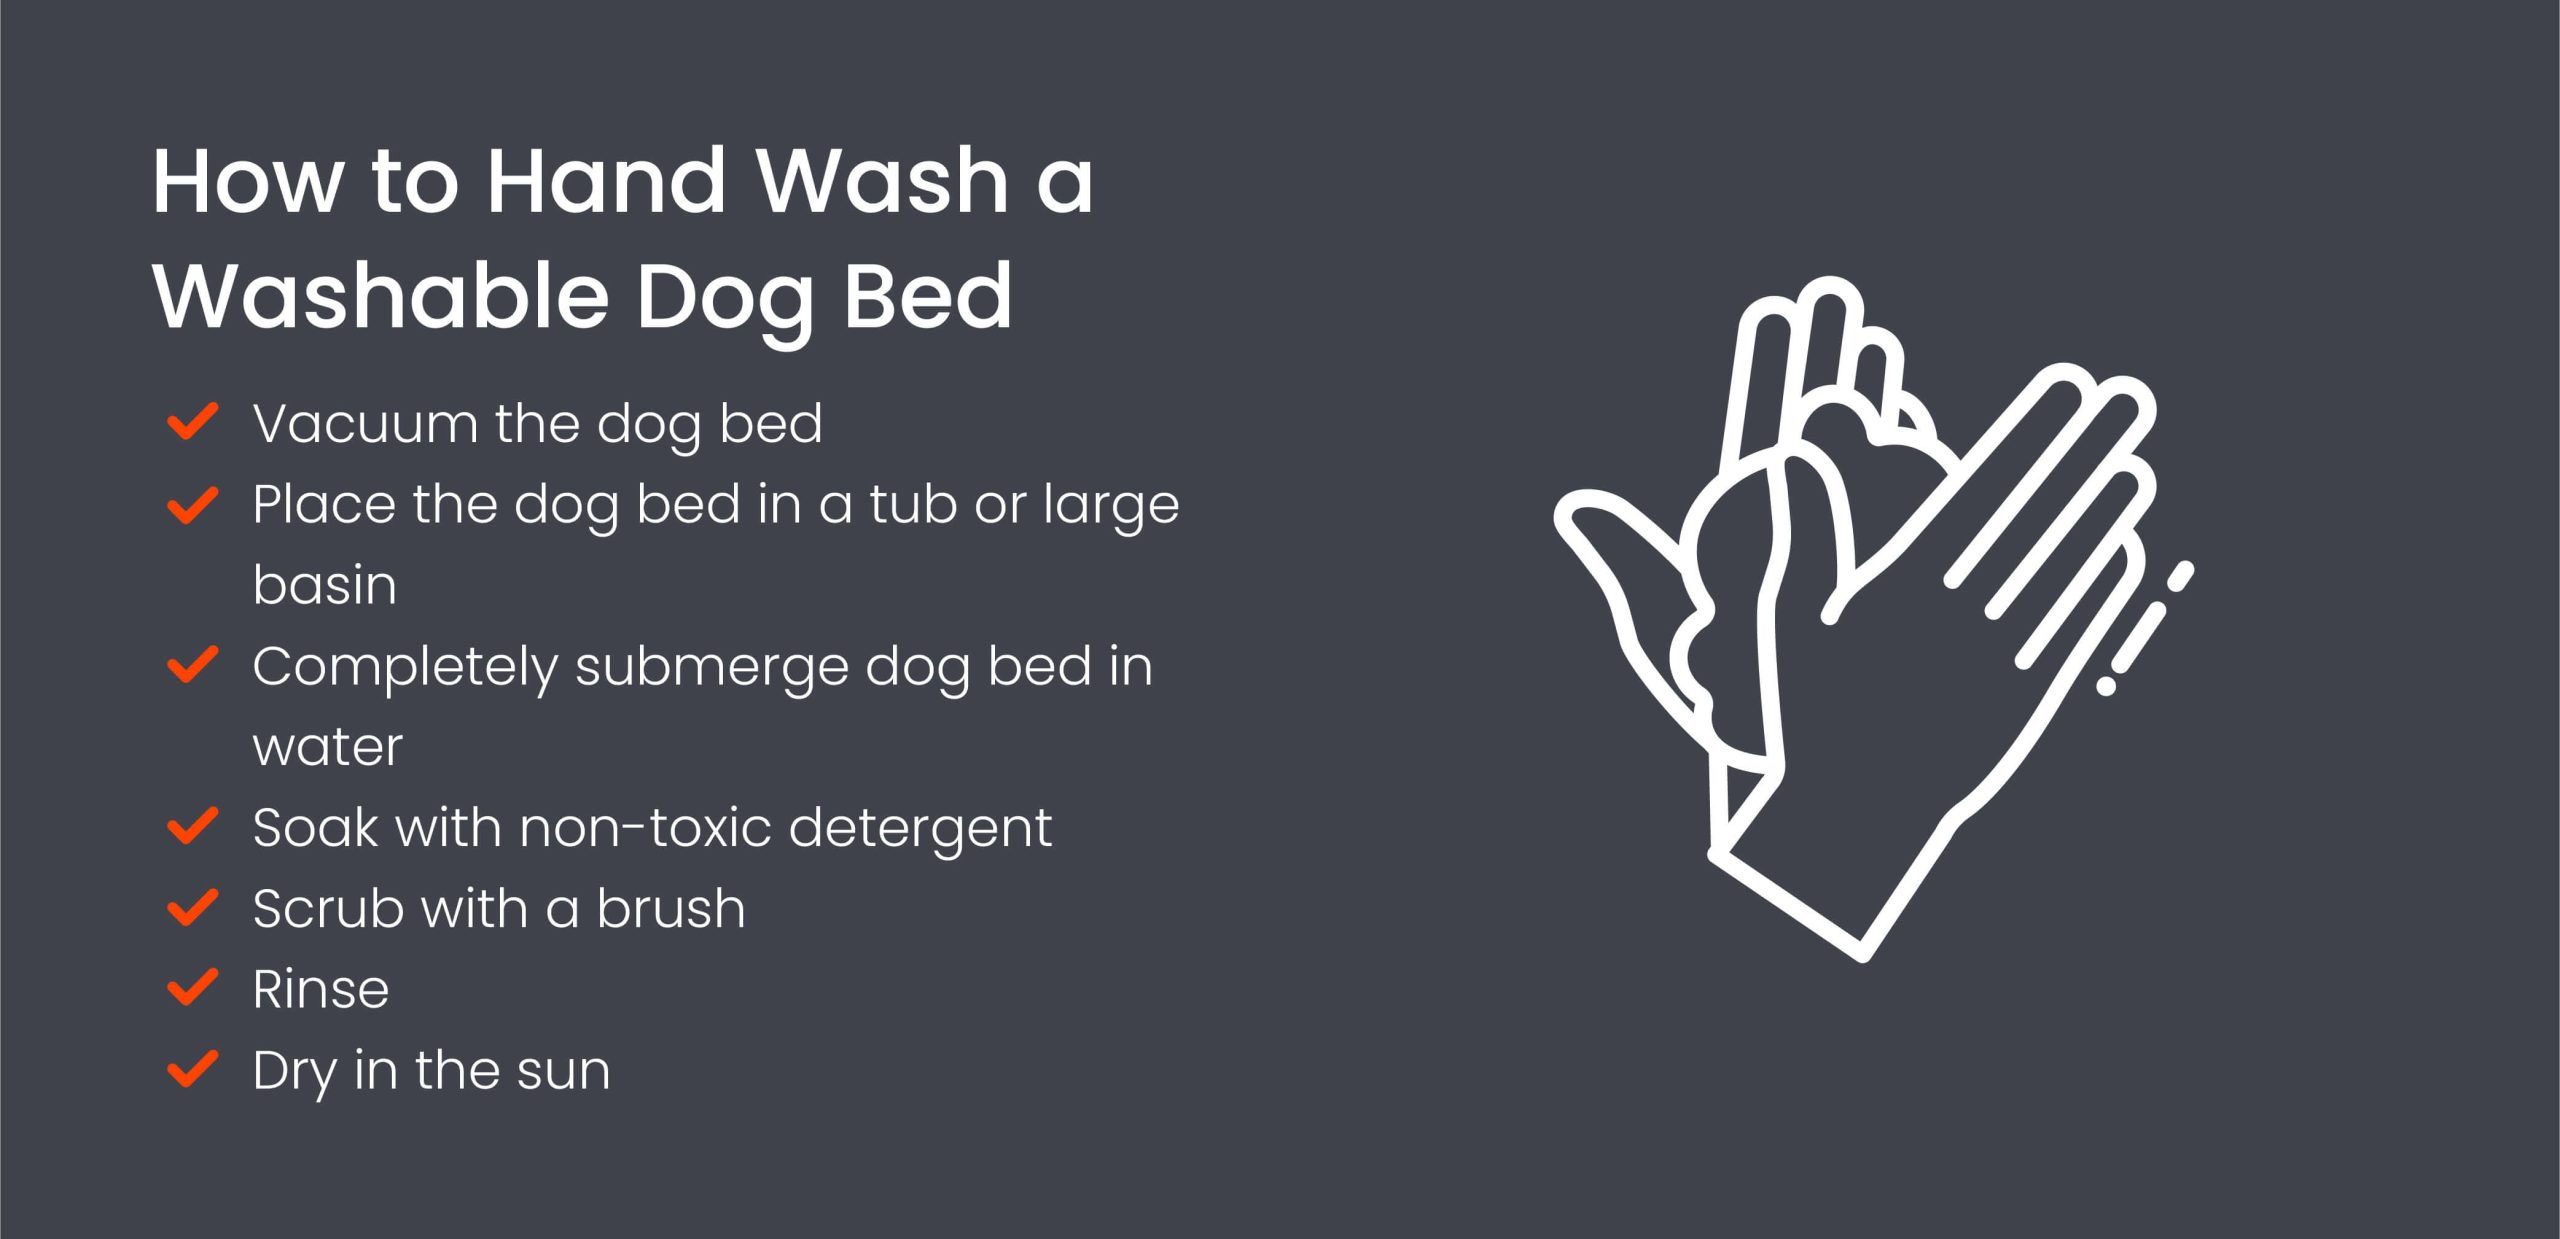 How to hand wash a washable dog bed